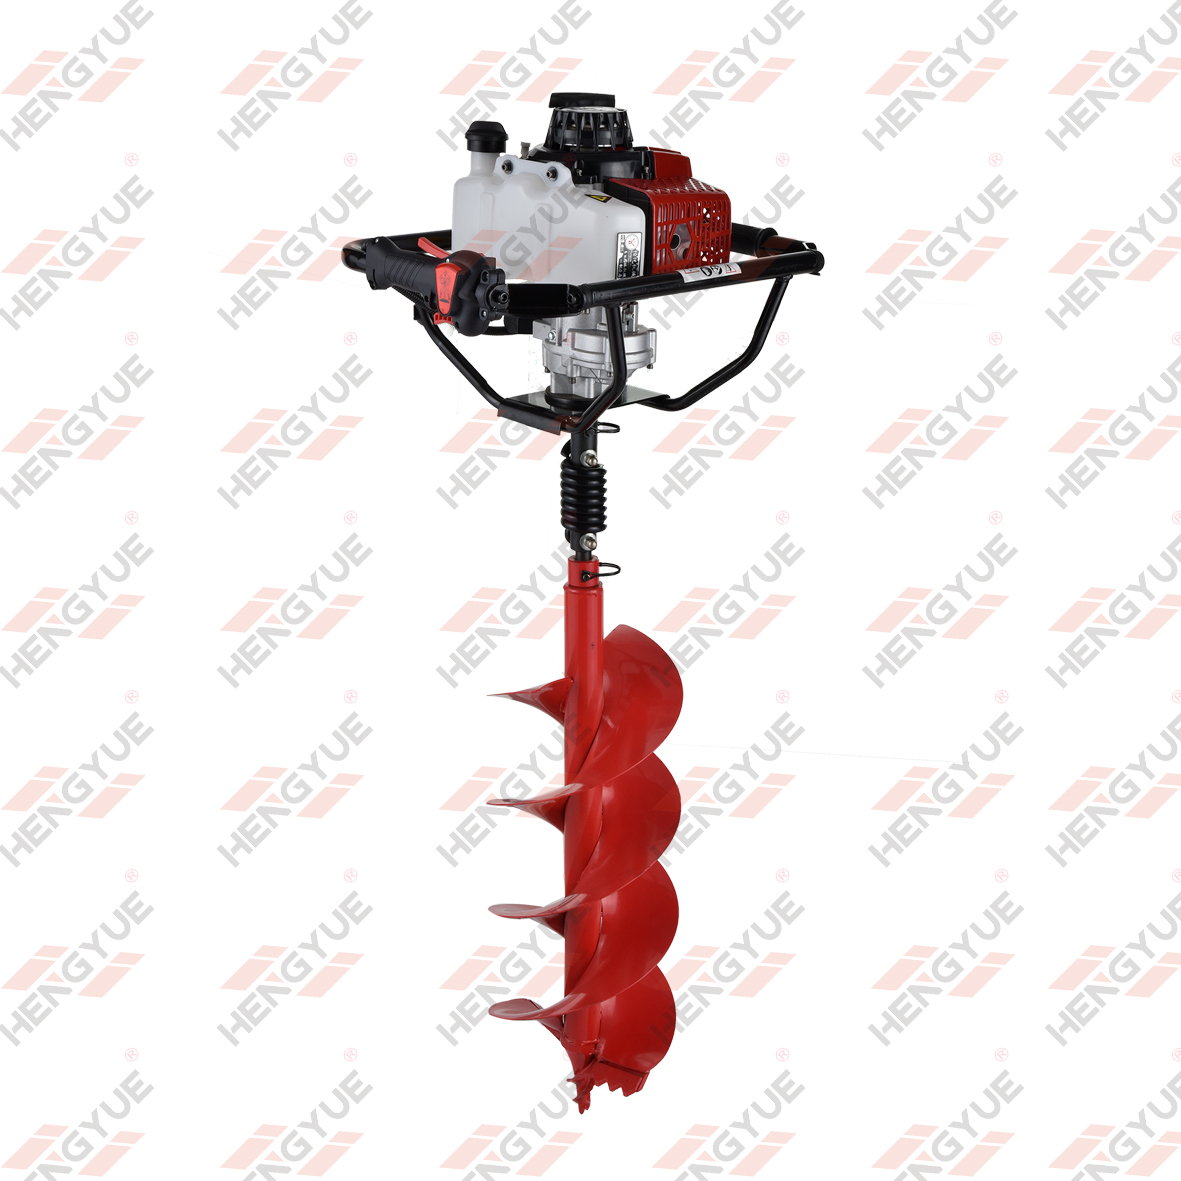 63/68cc 2 Stroke Engine Powered Earth Auger 